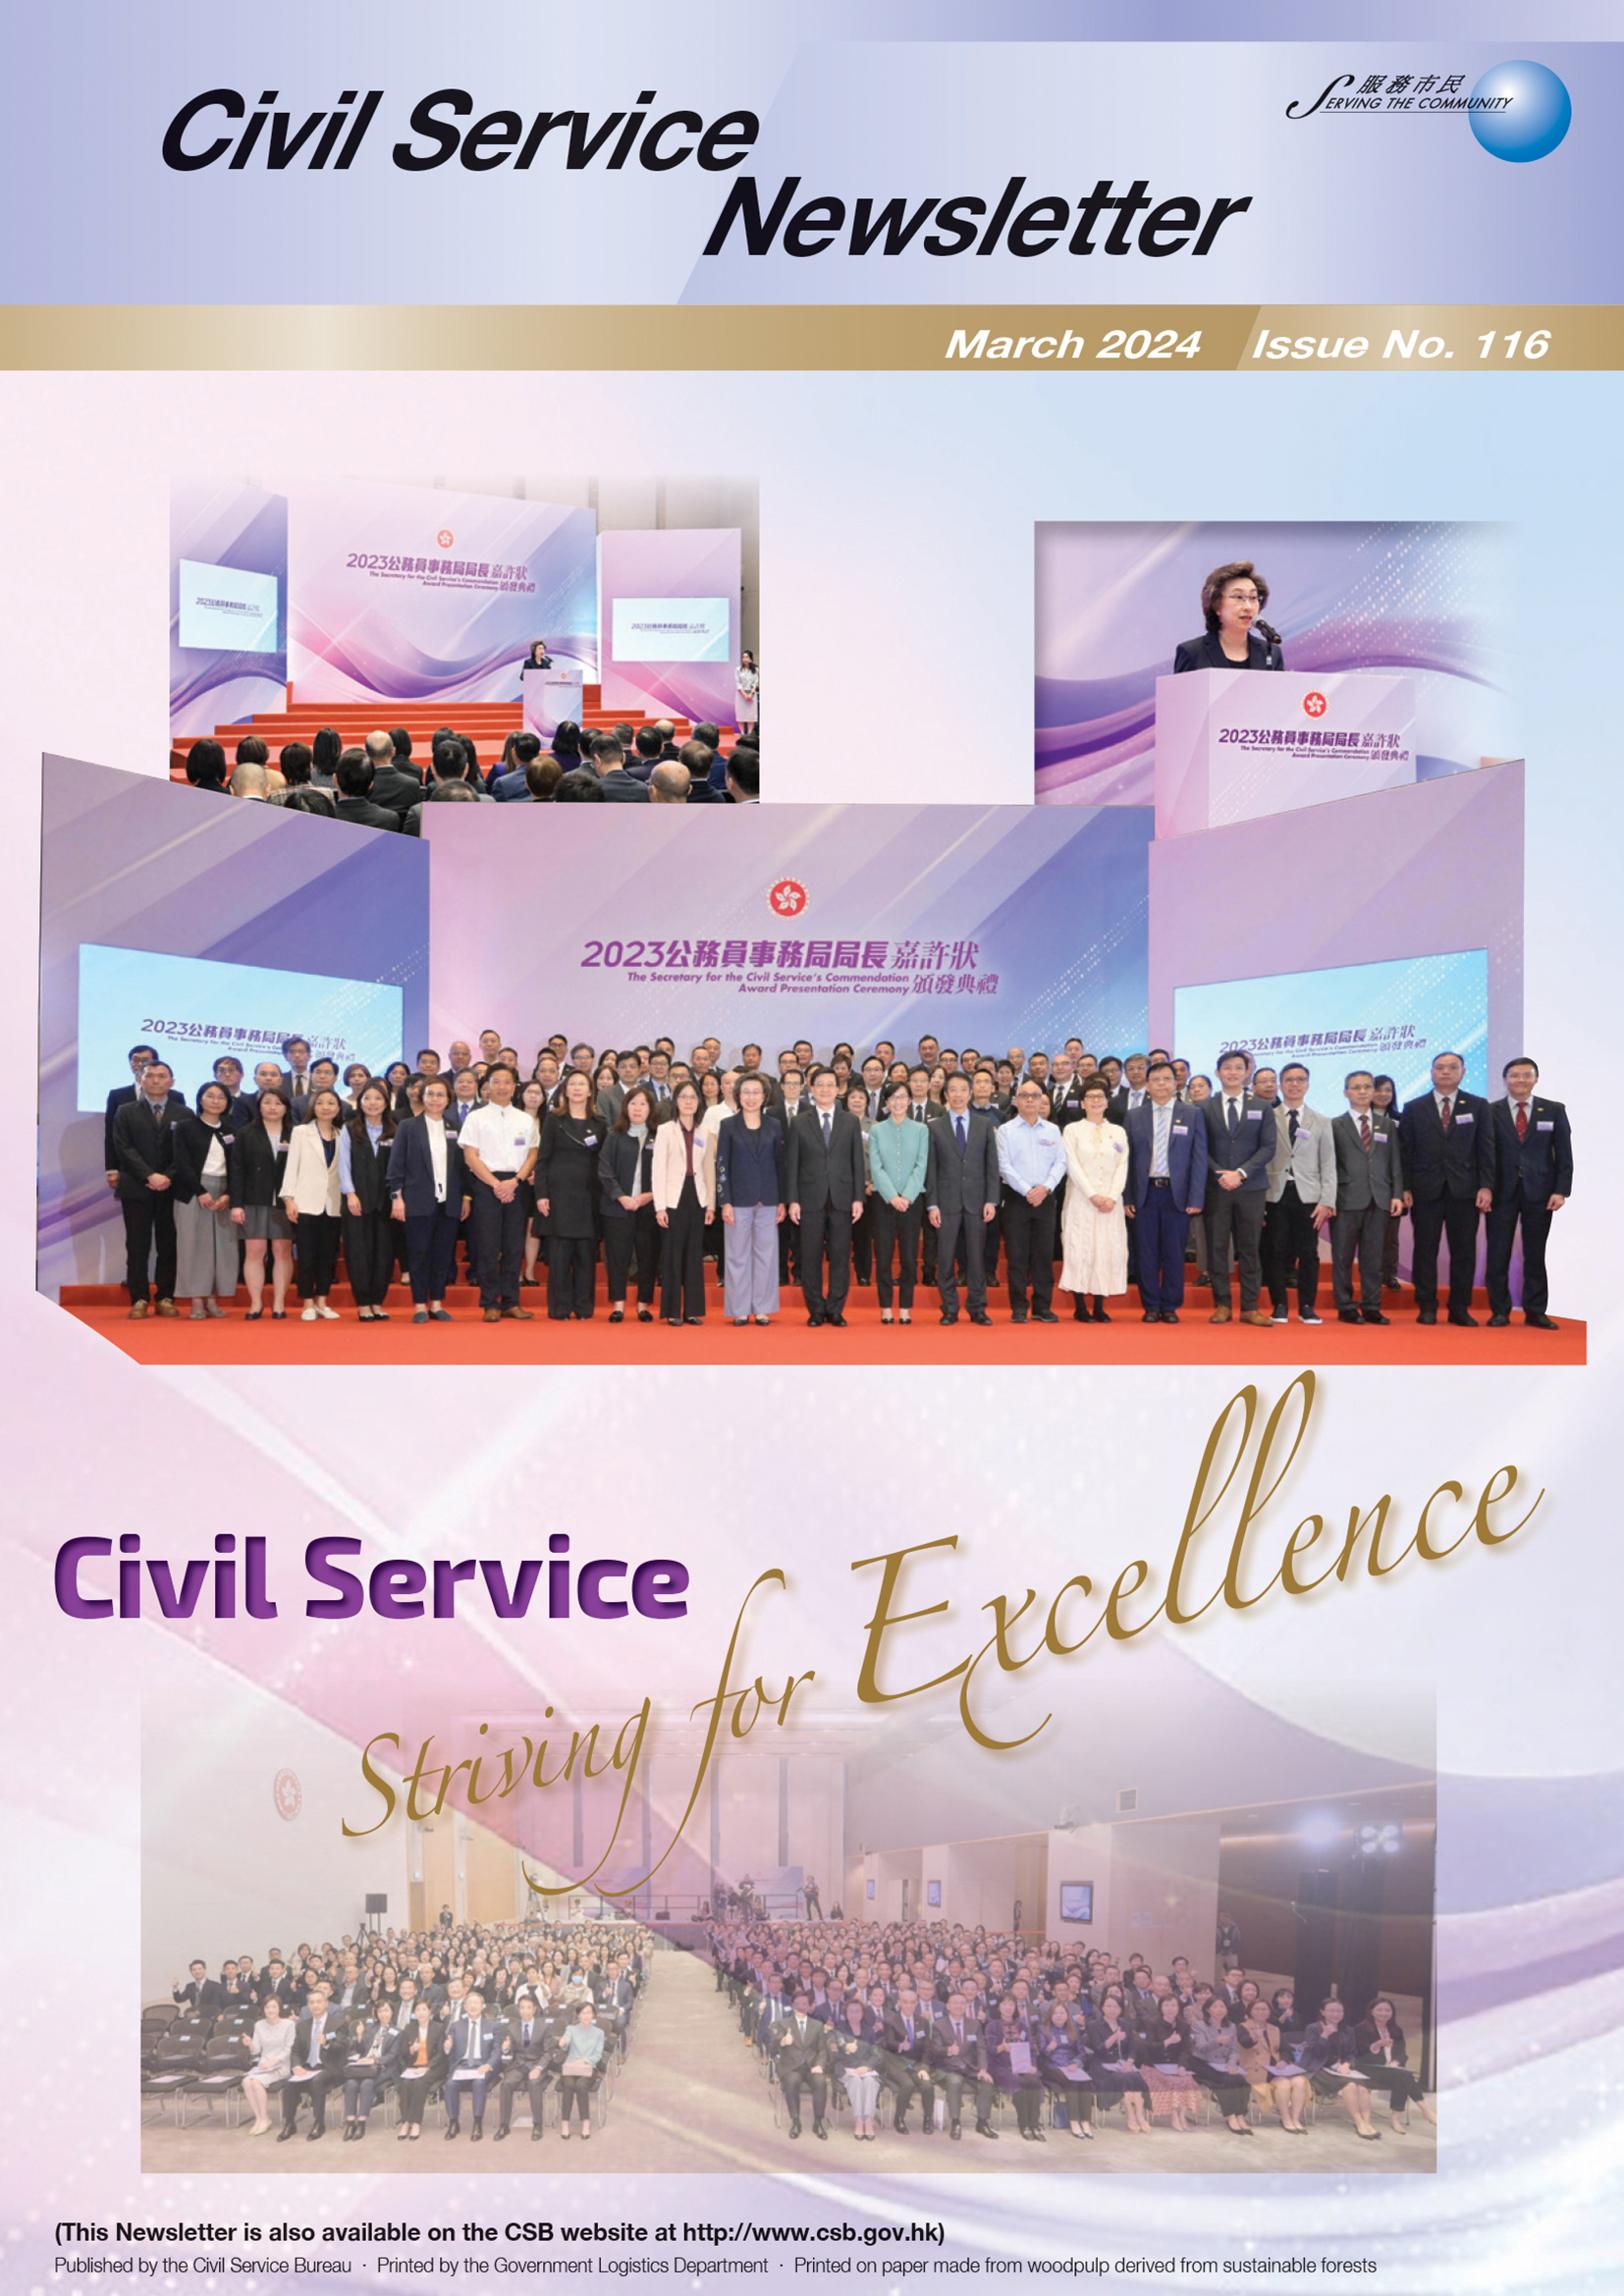 Cover of the latest issue of Civil Service Newsletter